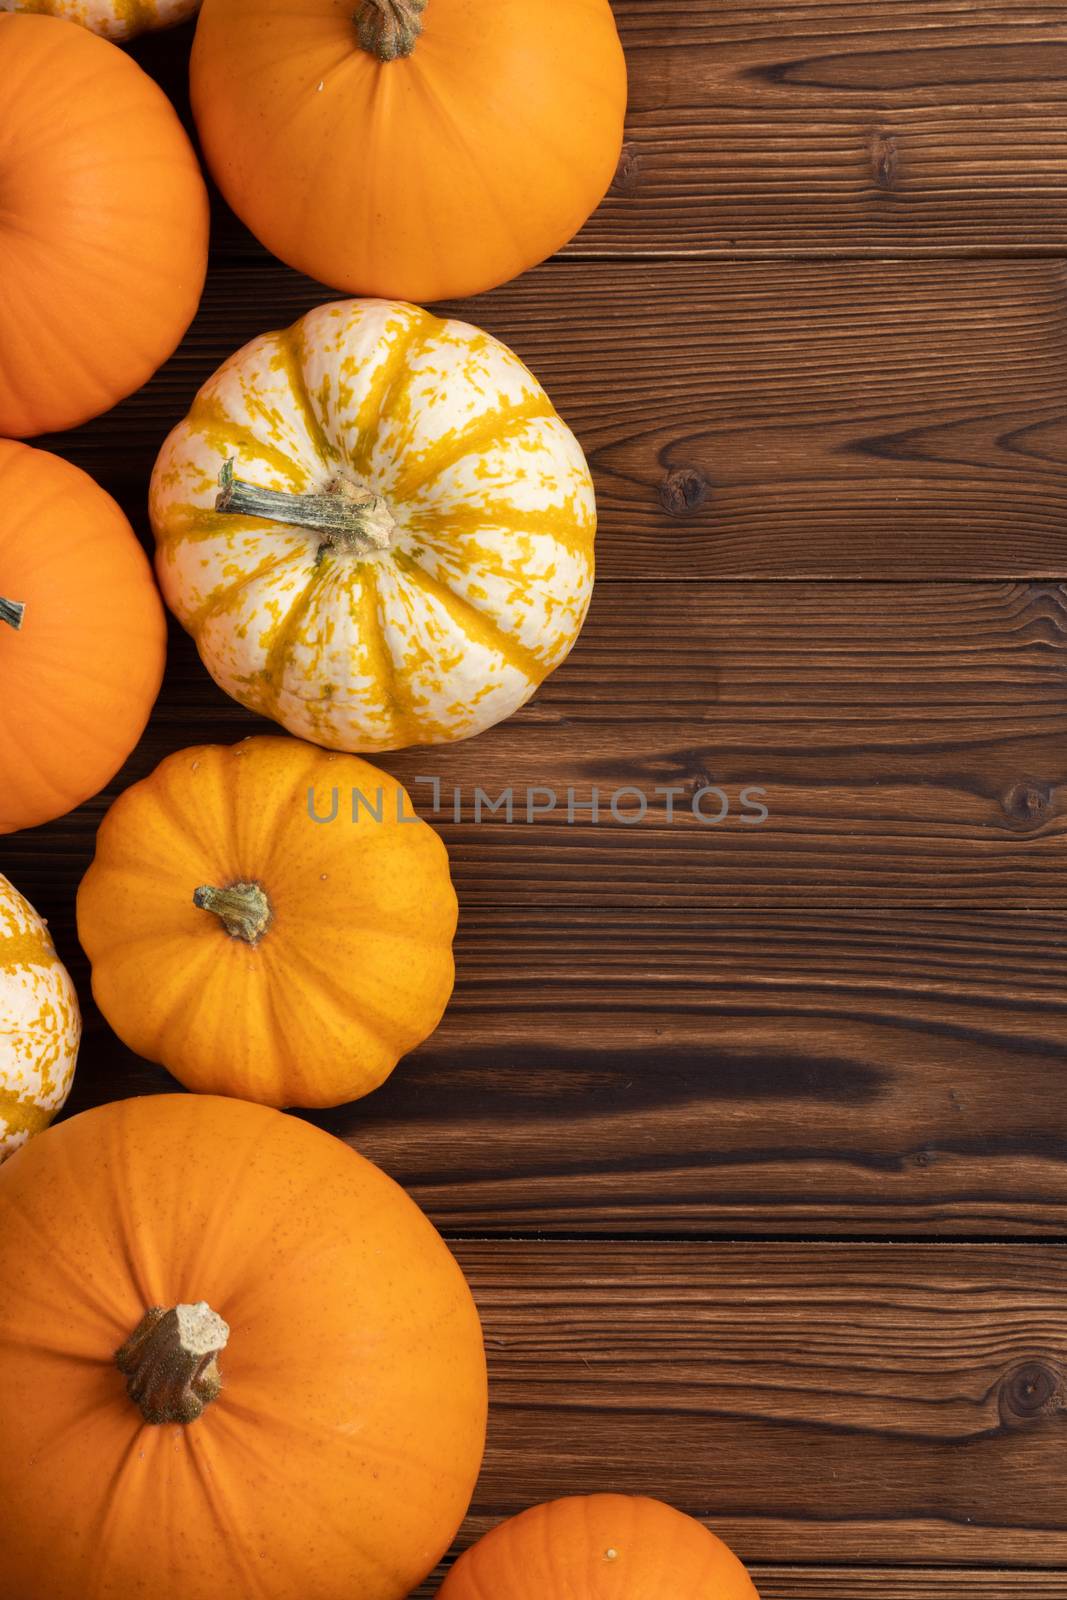 Many orange pumpkins on wooden background , Halloween concept , top view with copy space